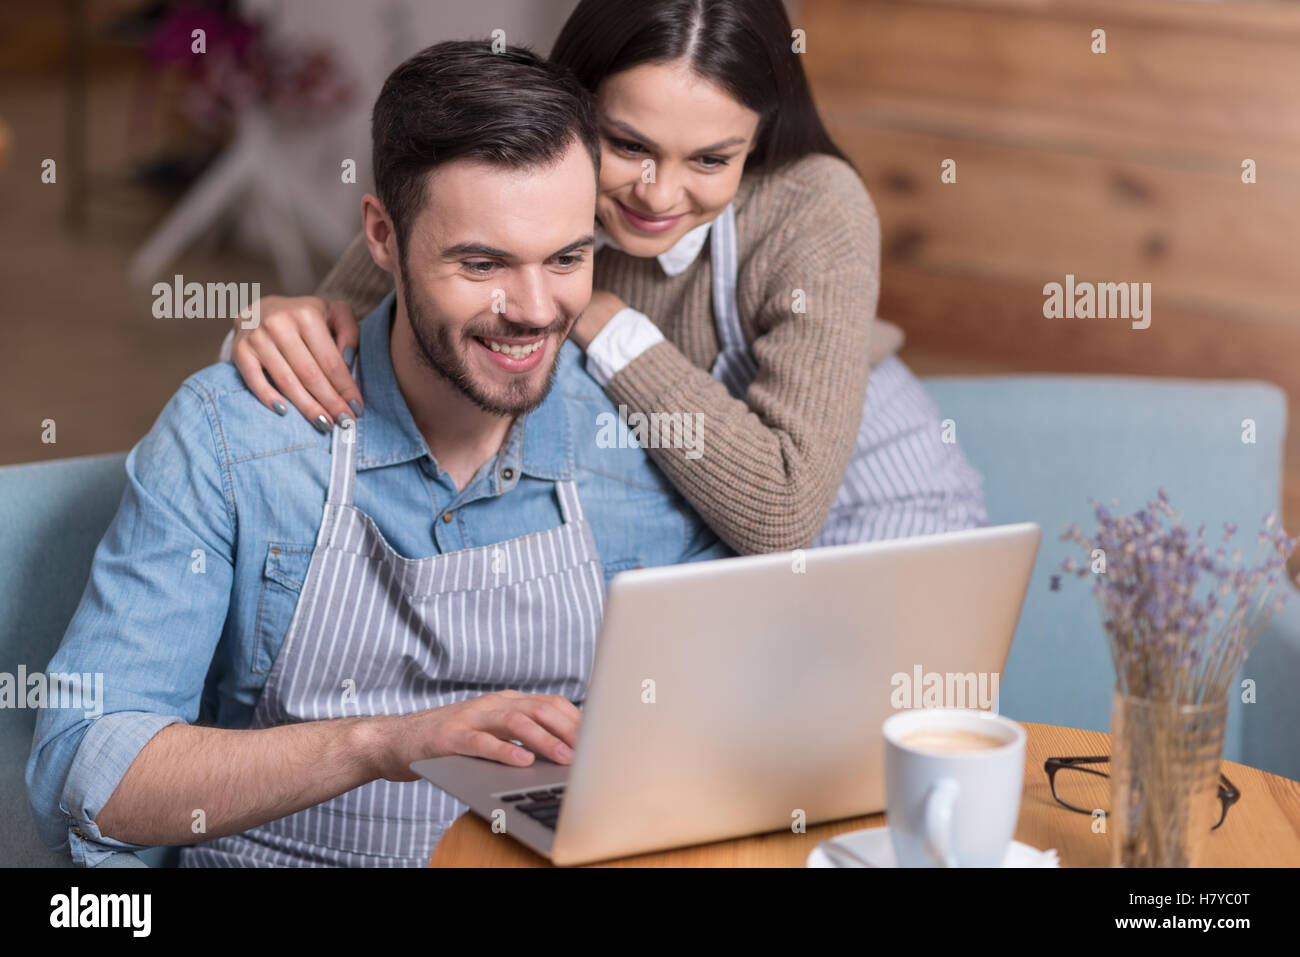 Happy couple smiling and using laptop. Stock Photo